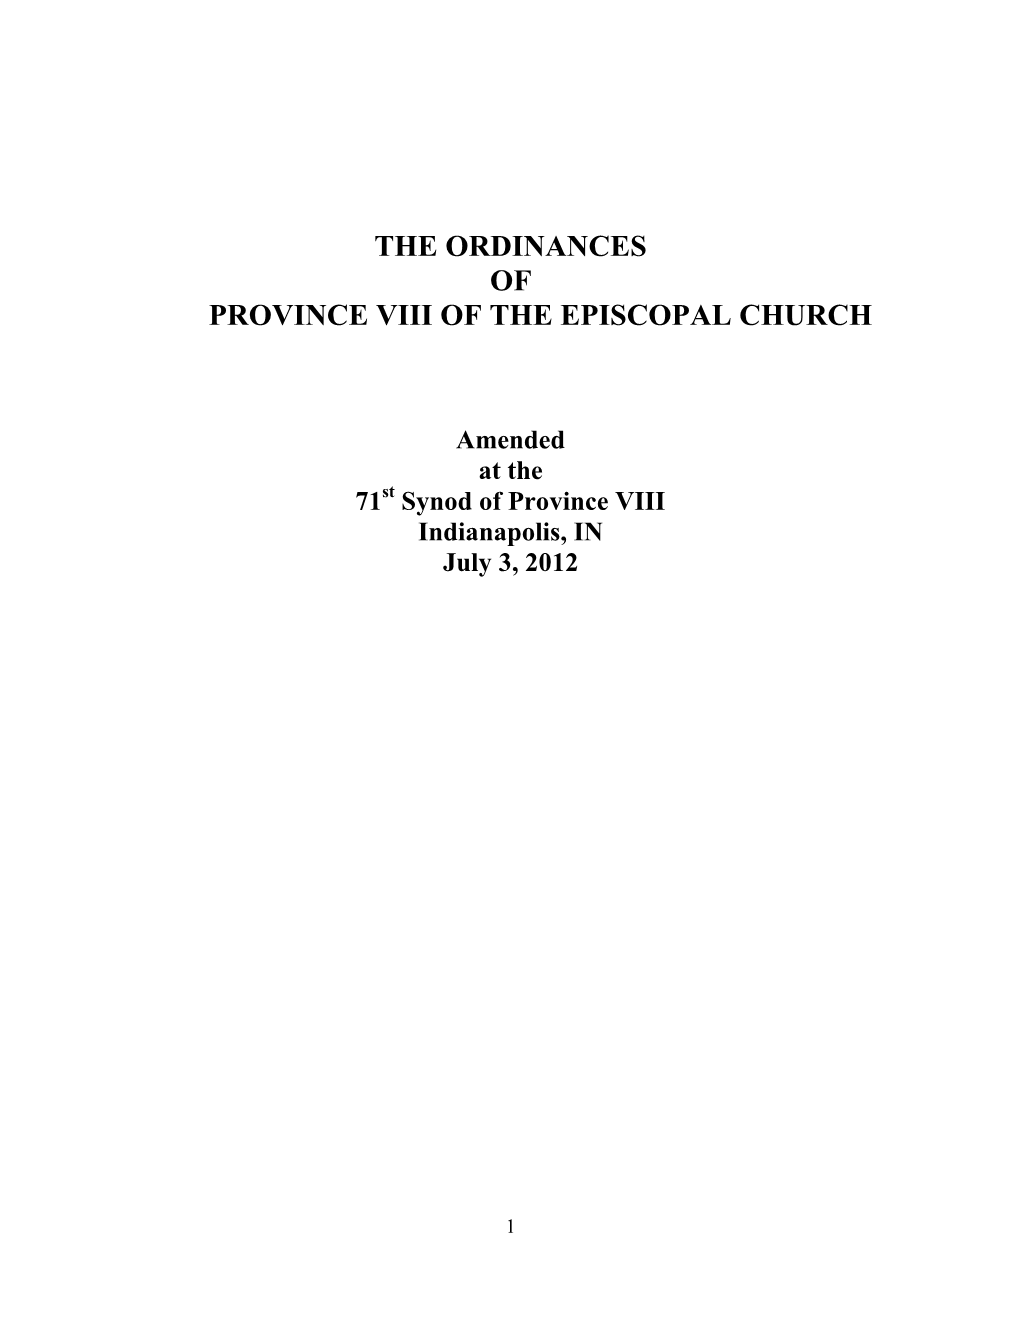 The Ordinances of Province Viii of the Episcopal Church